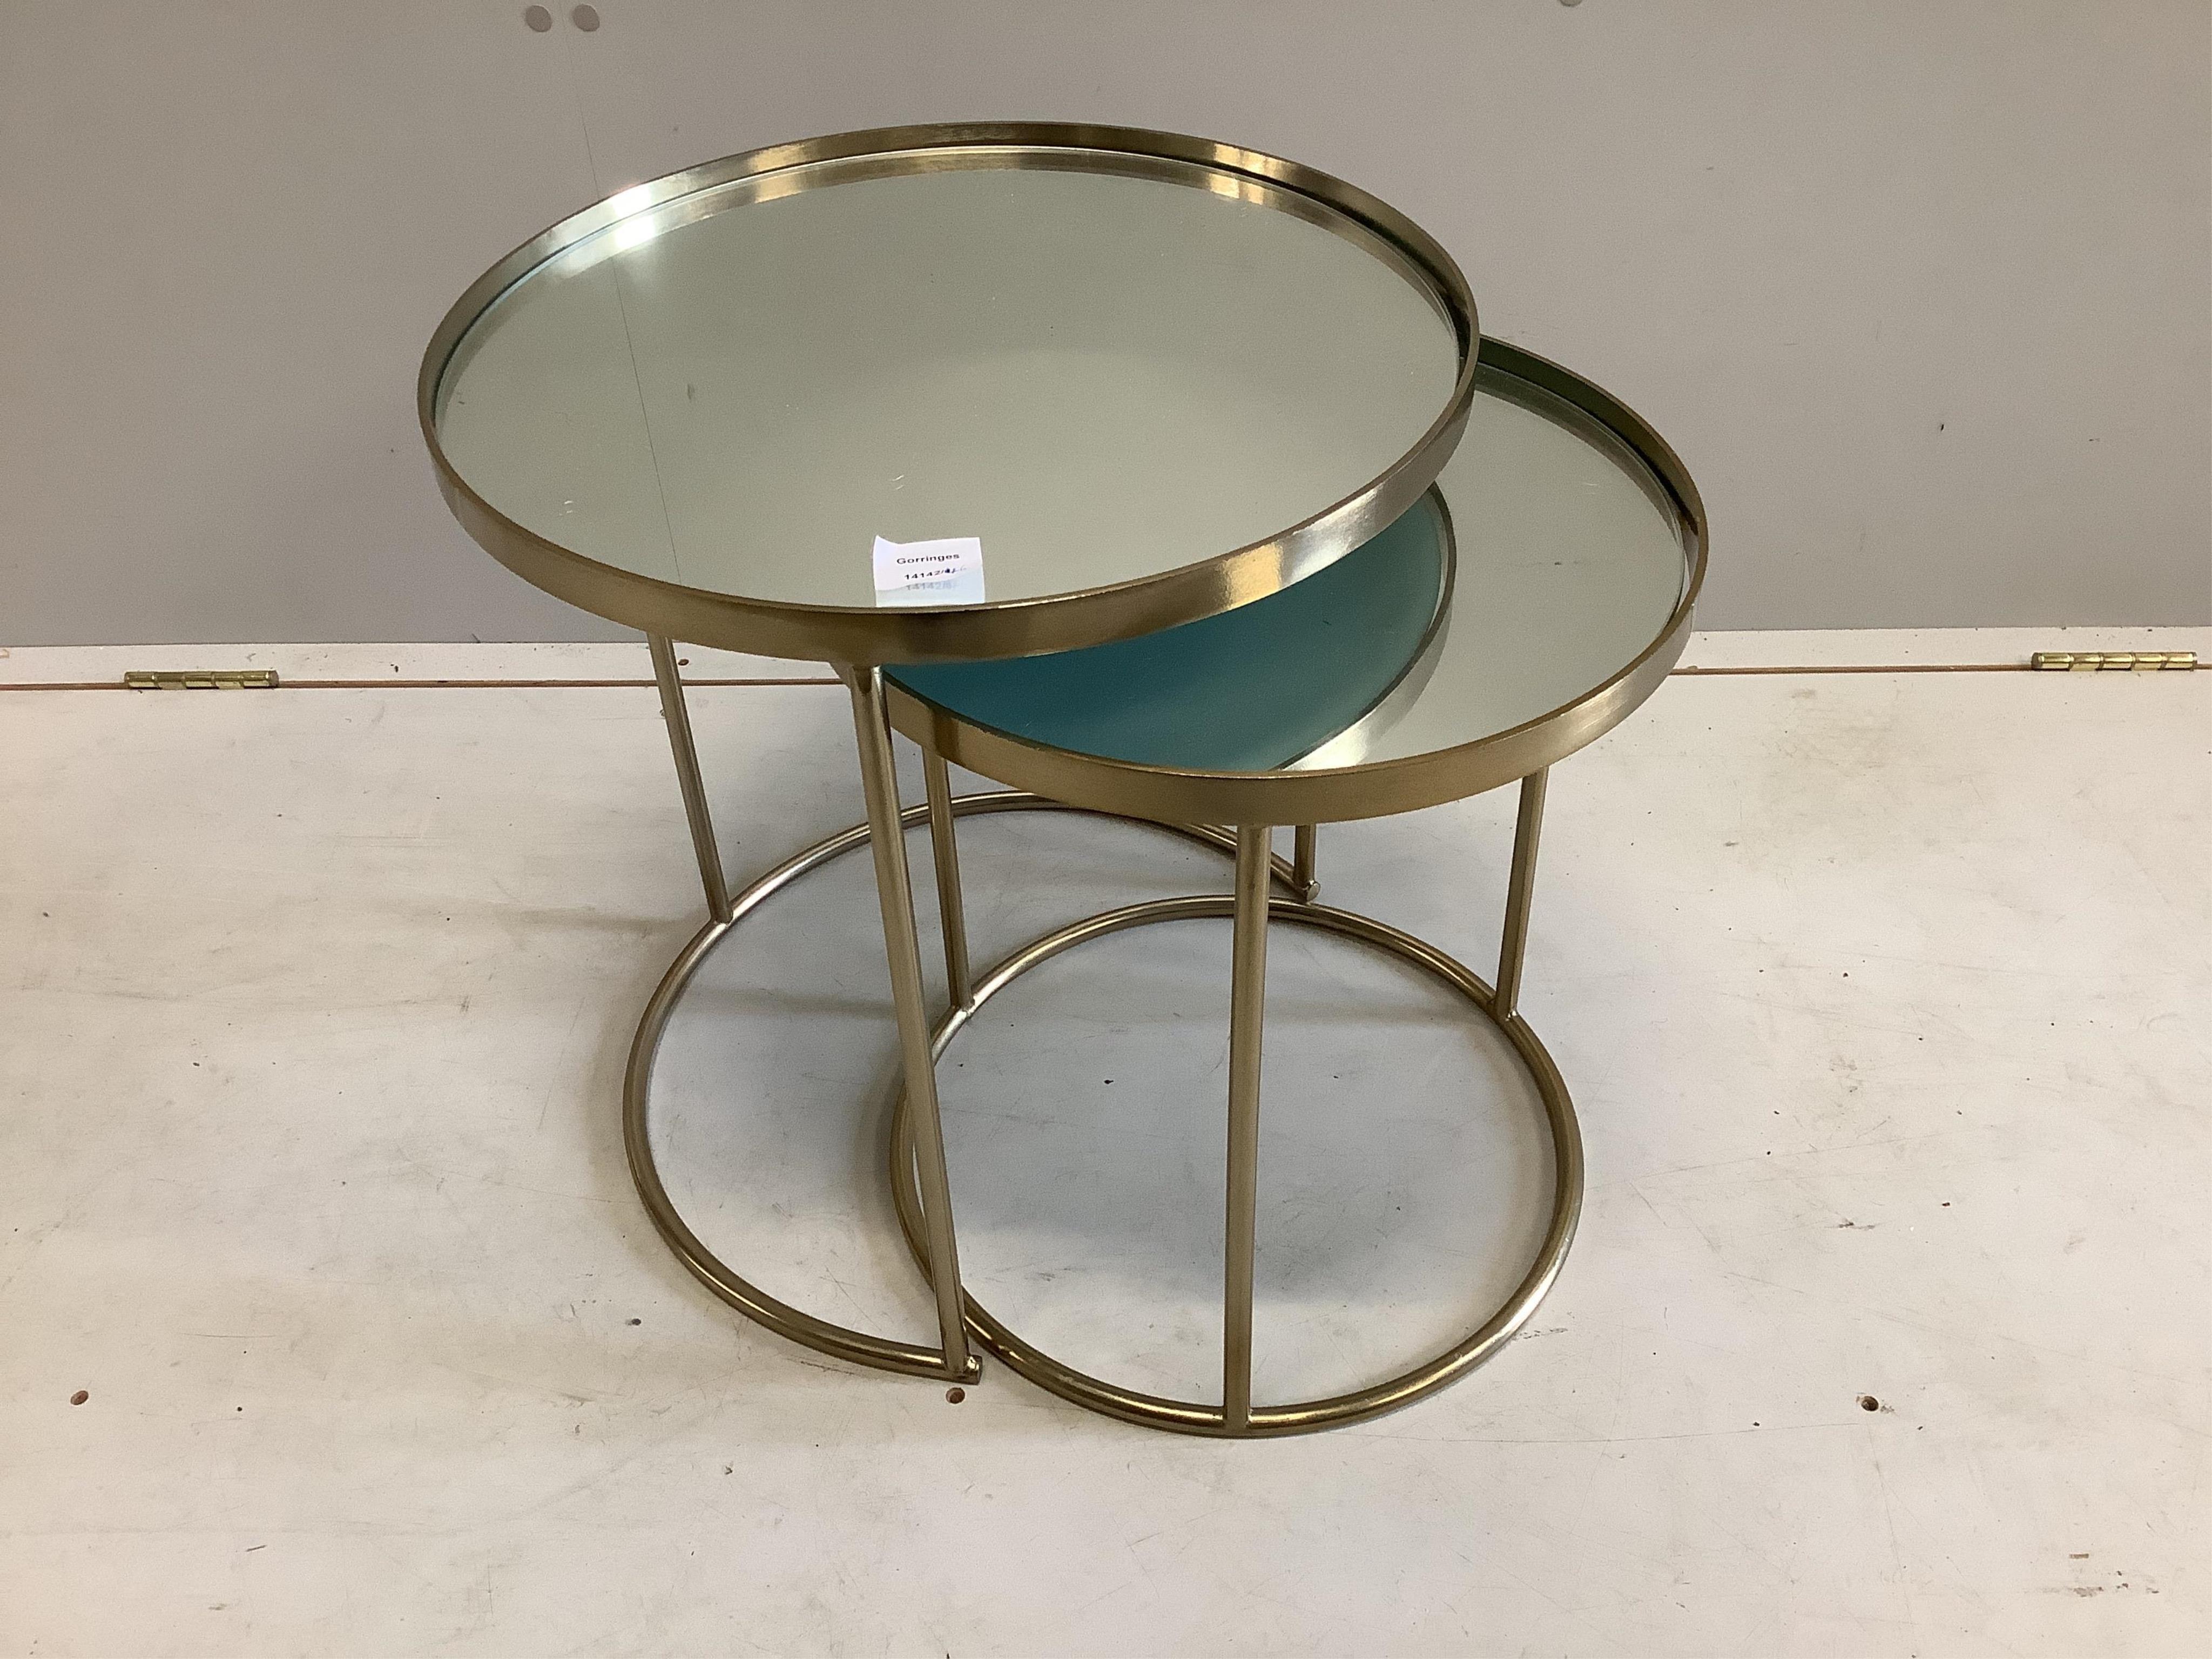 A nest of two glass and metal circular tables, diameter 44cm, height 46cm